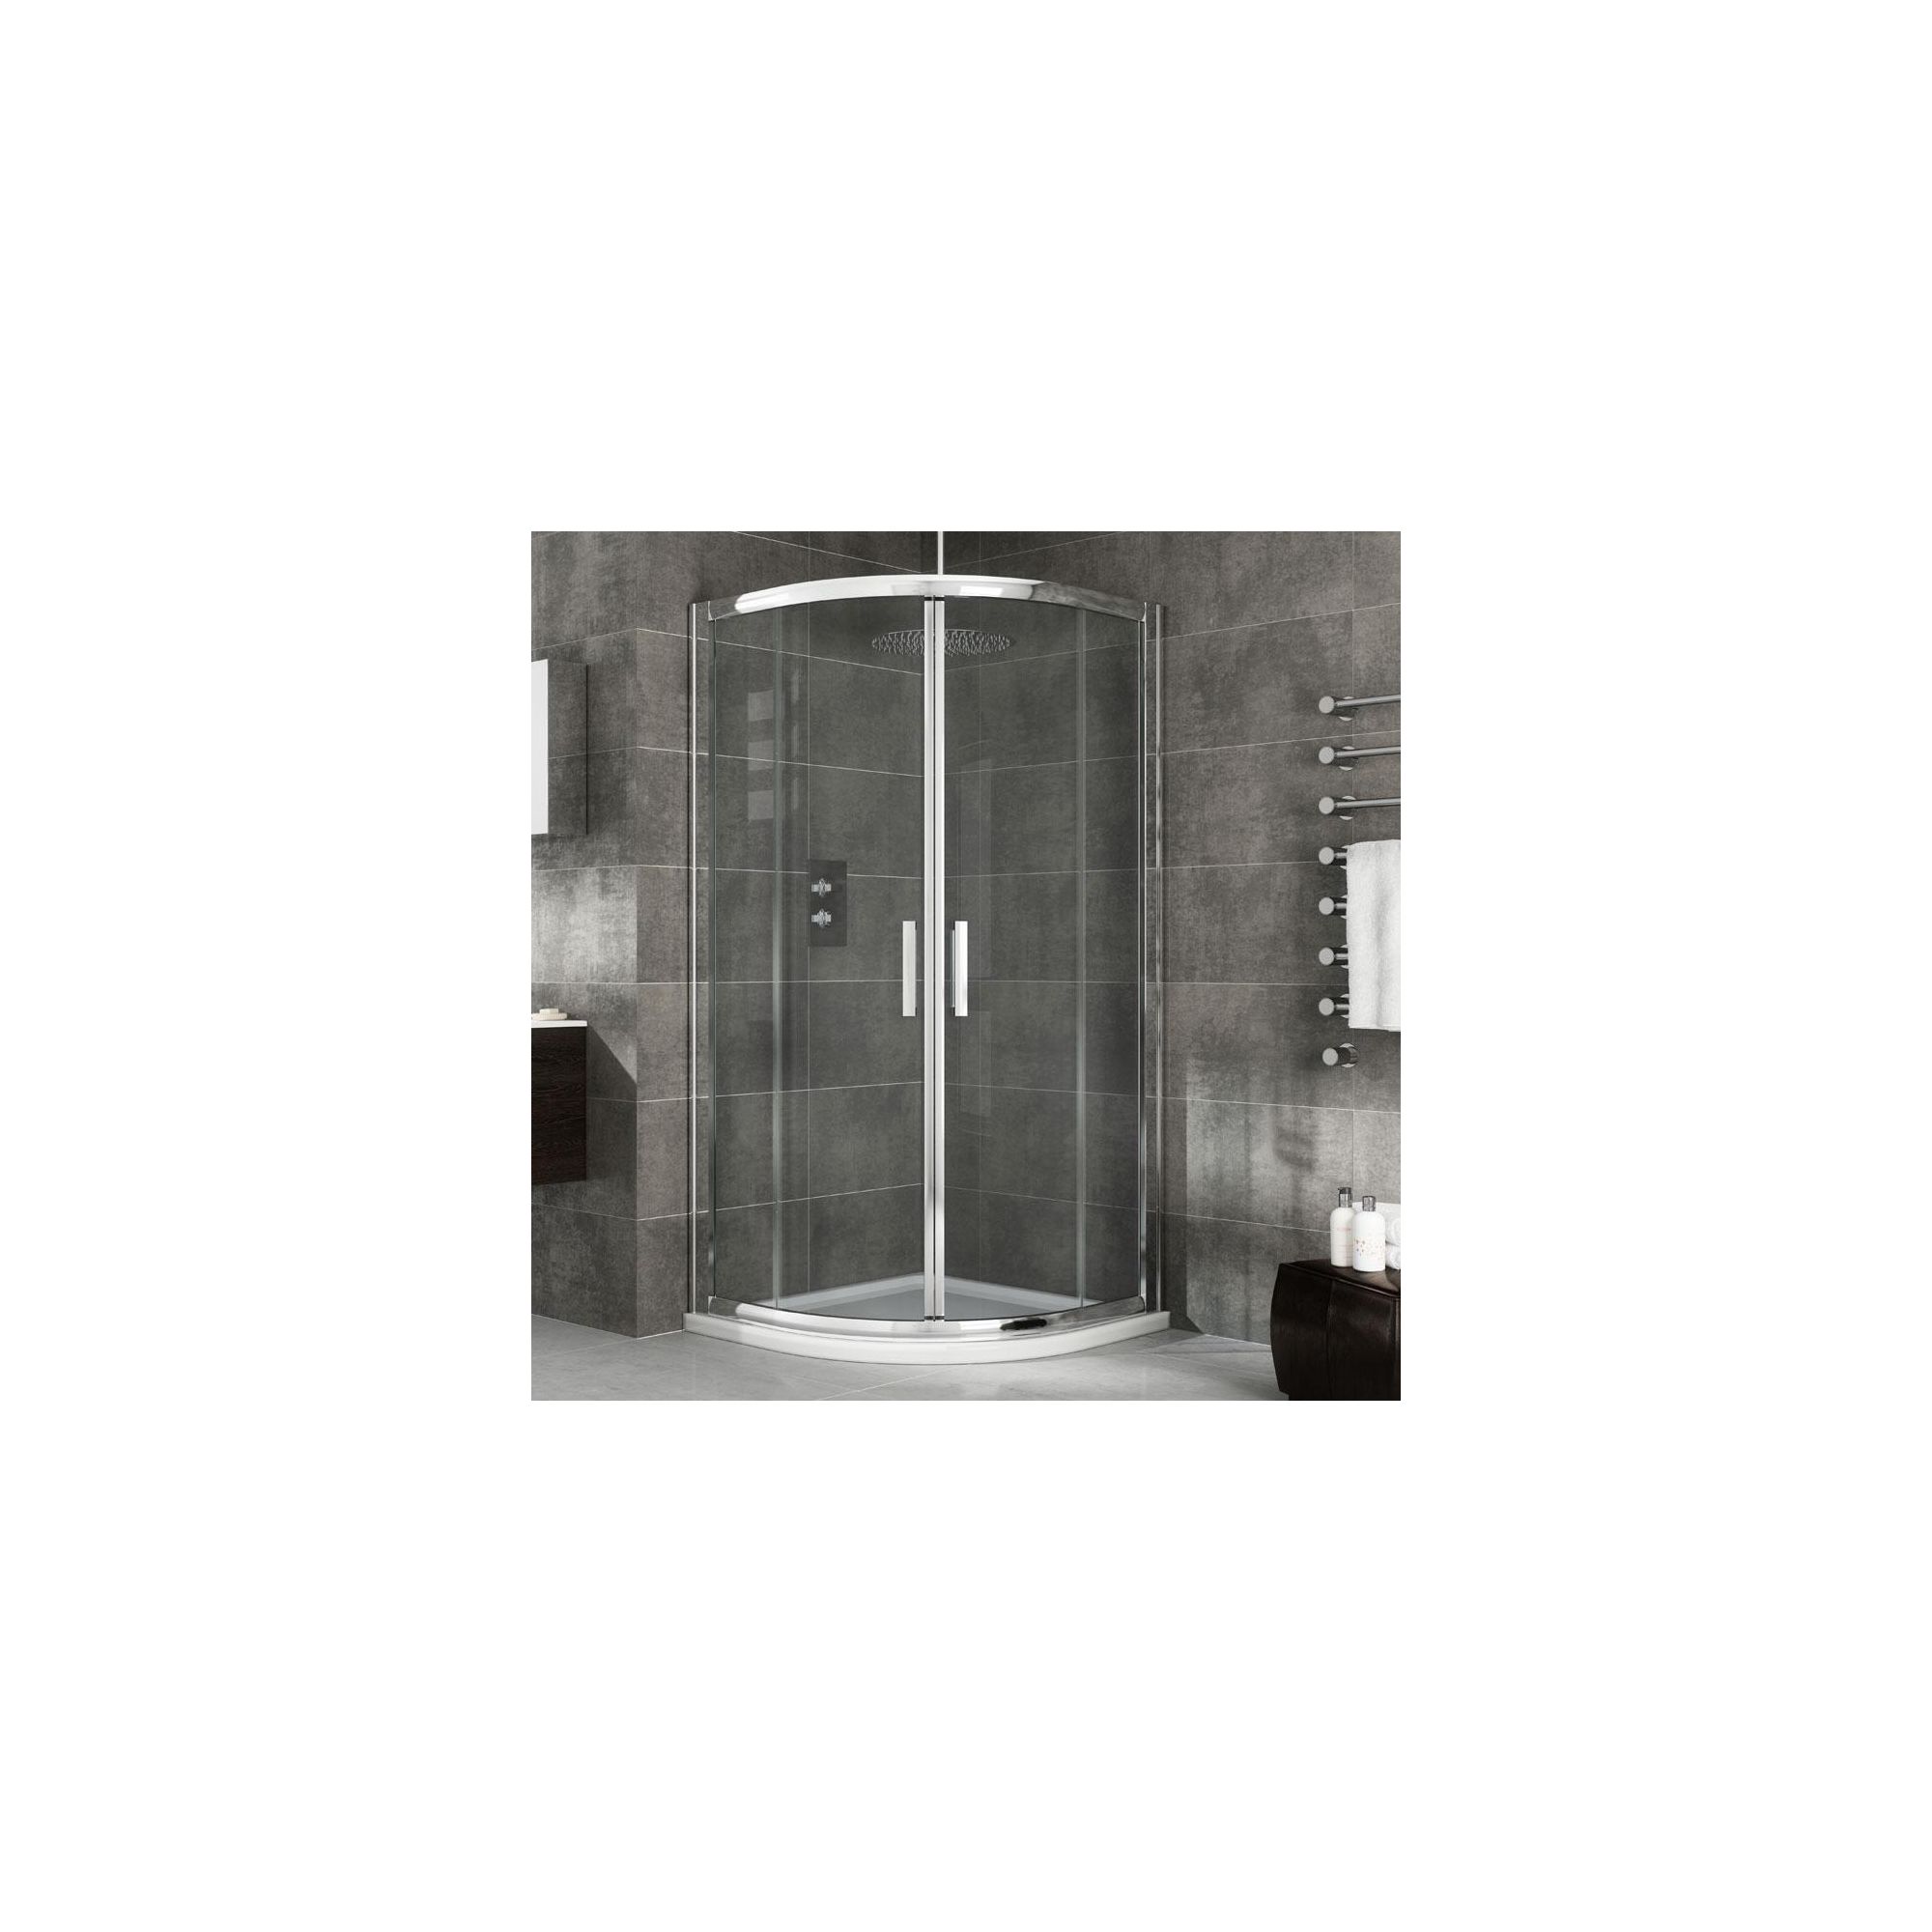 Elemis Eternity Two-Door Quadrant Shower Enclosure, 1000mm x 1000mm, 8mm Glass, Low Profile Tray at Tesco Direct